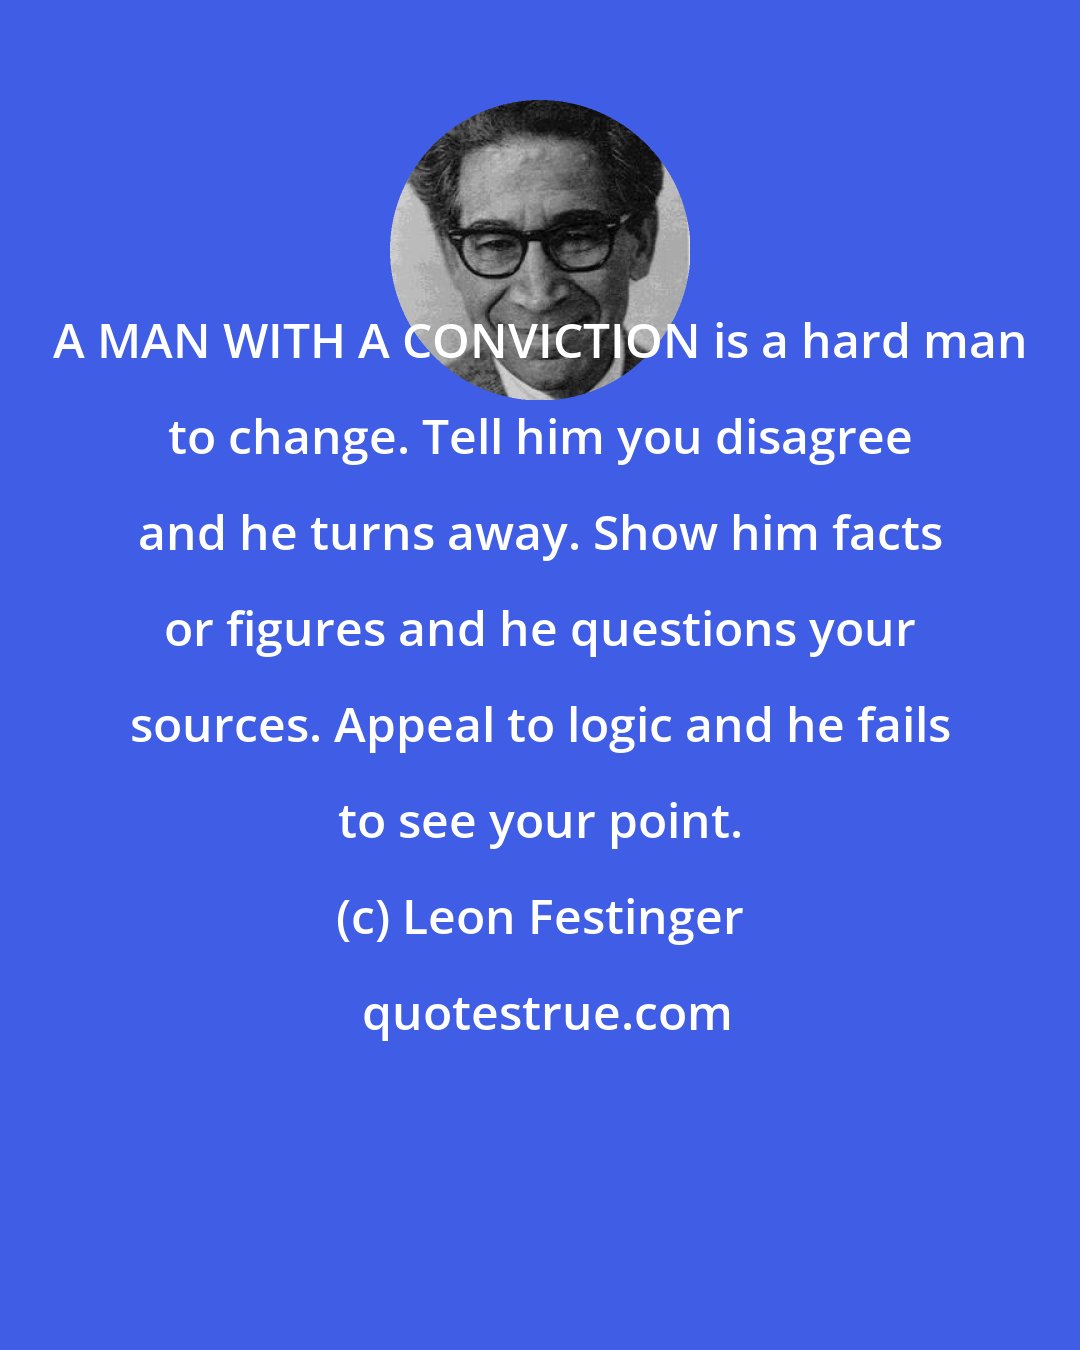 Leon Festinger: A MAN WITH A CONVICTION is a hard man to change. Tell him you disagree and he turns away. Show him facts or figures and he questions your sources. Appeal to logic and he fails to see your point.